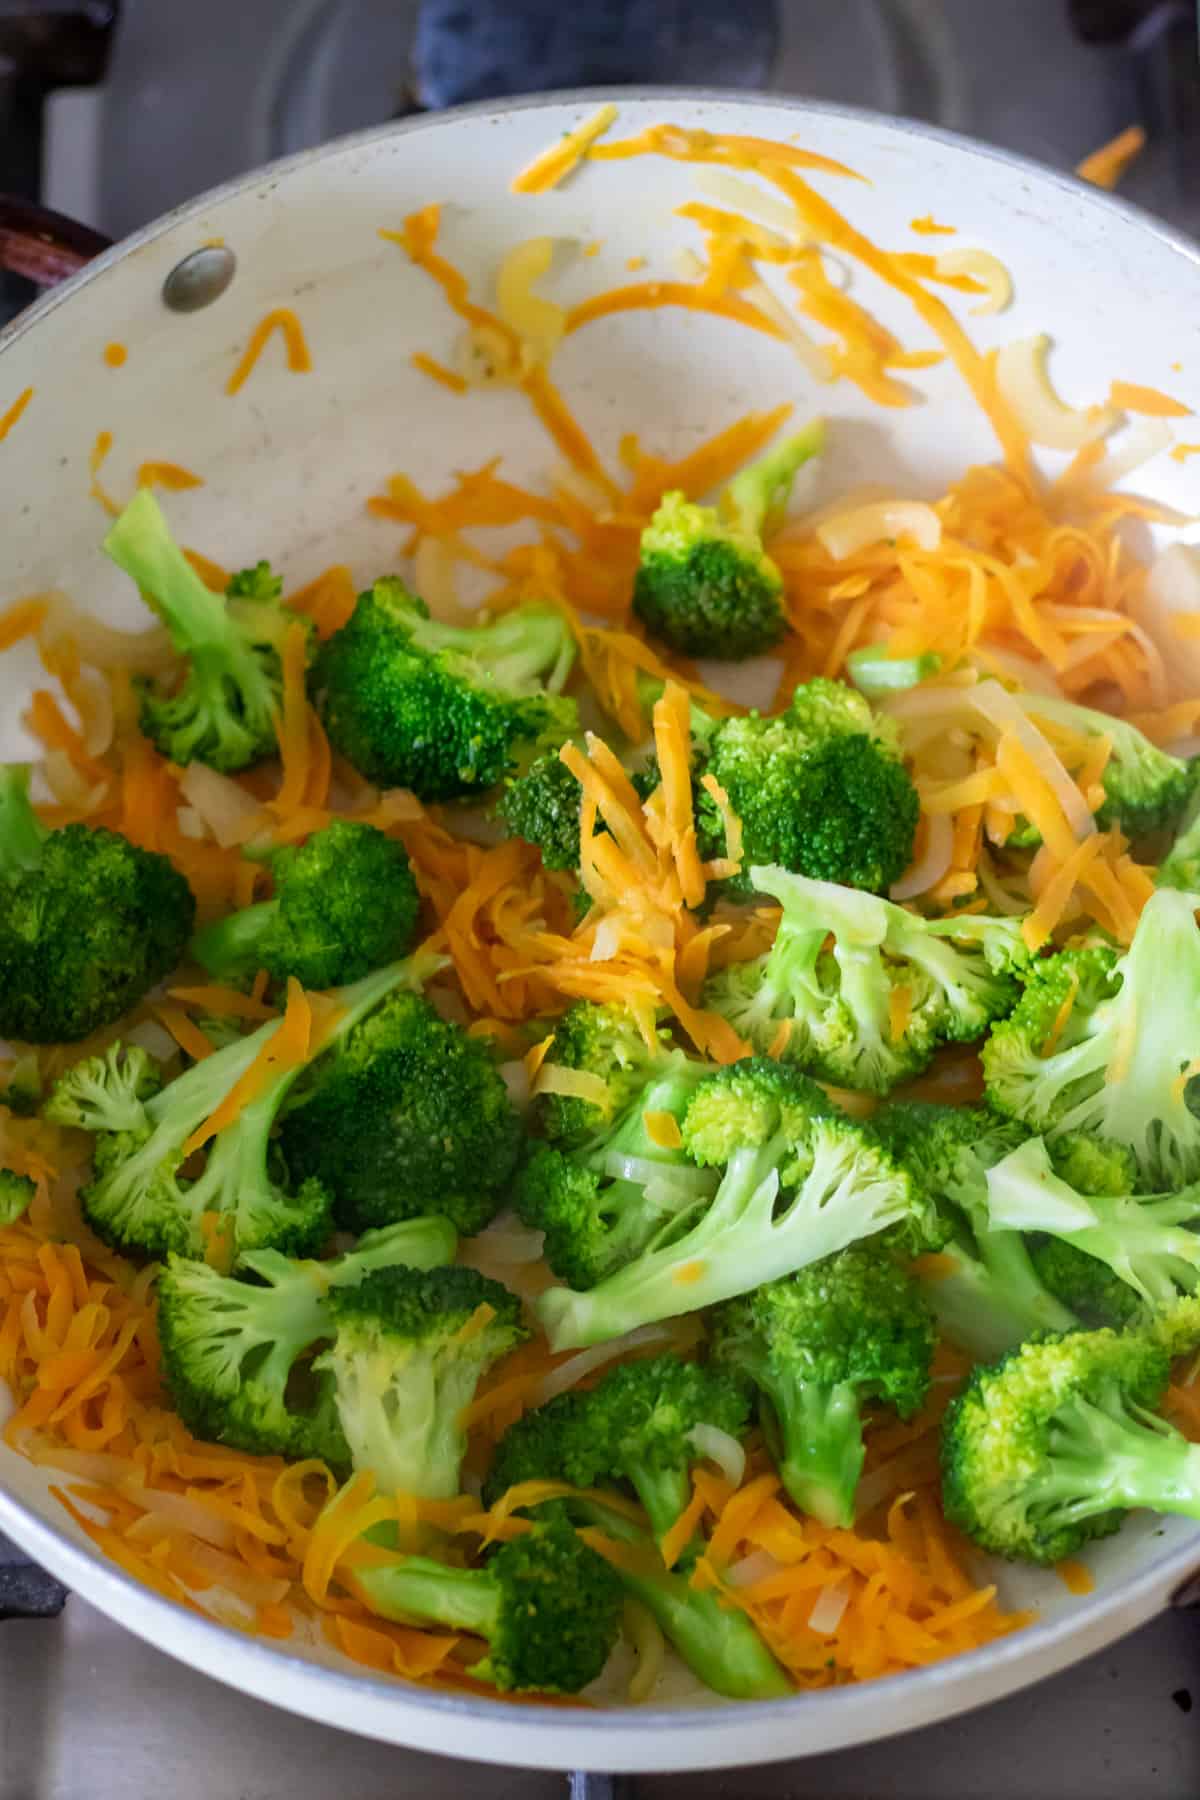 Cooking carrot and broccoli.